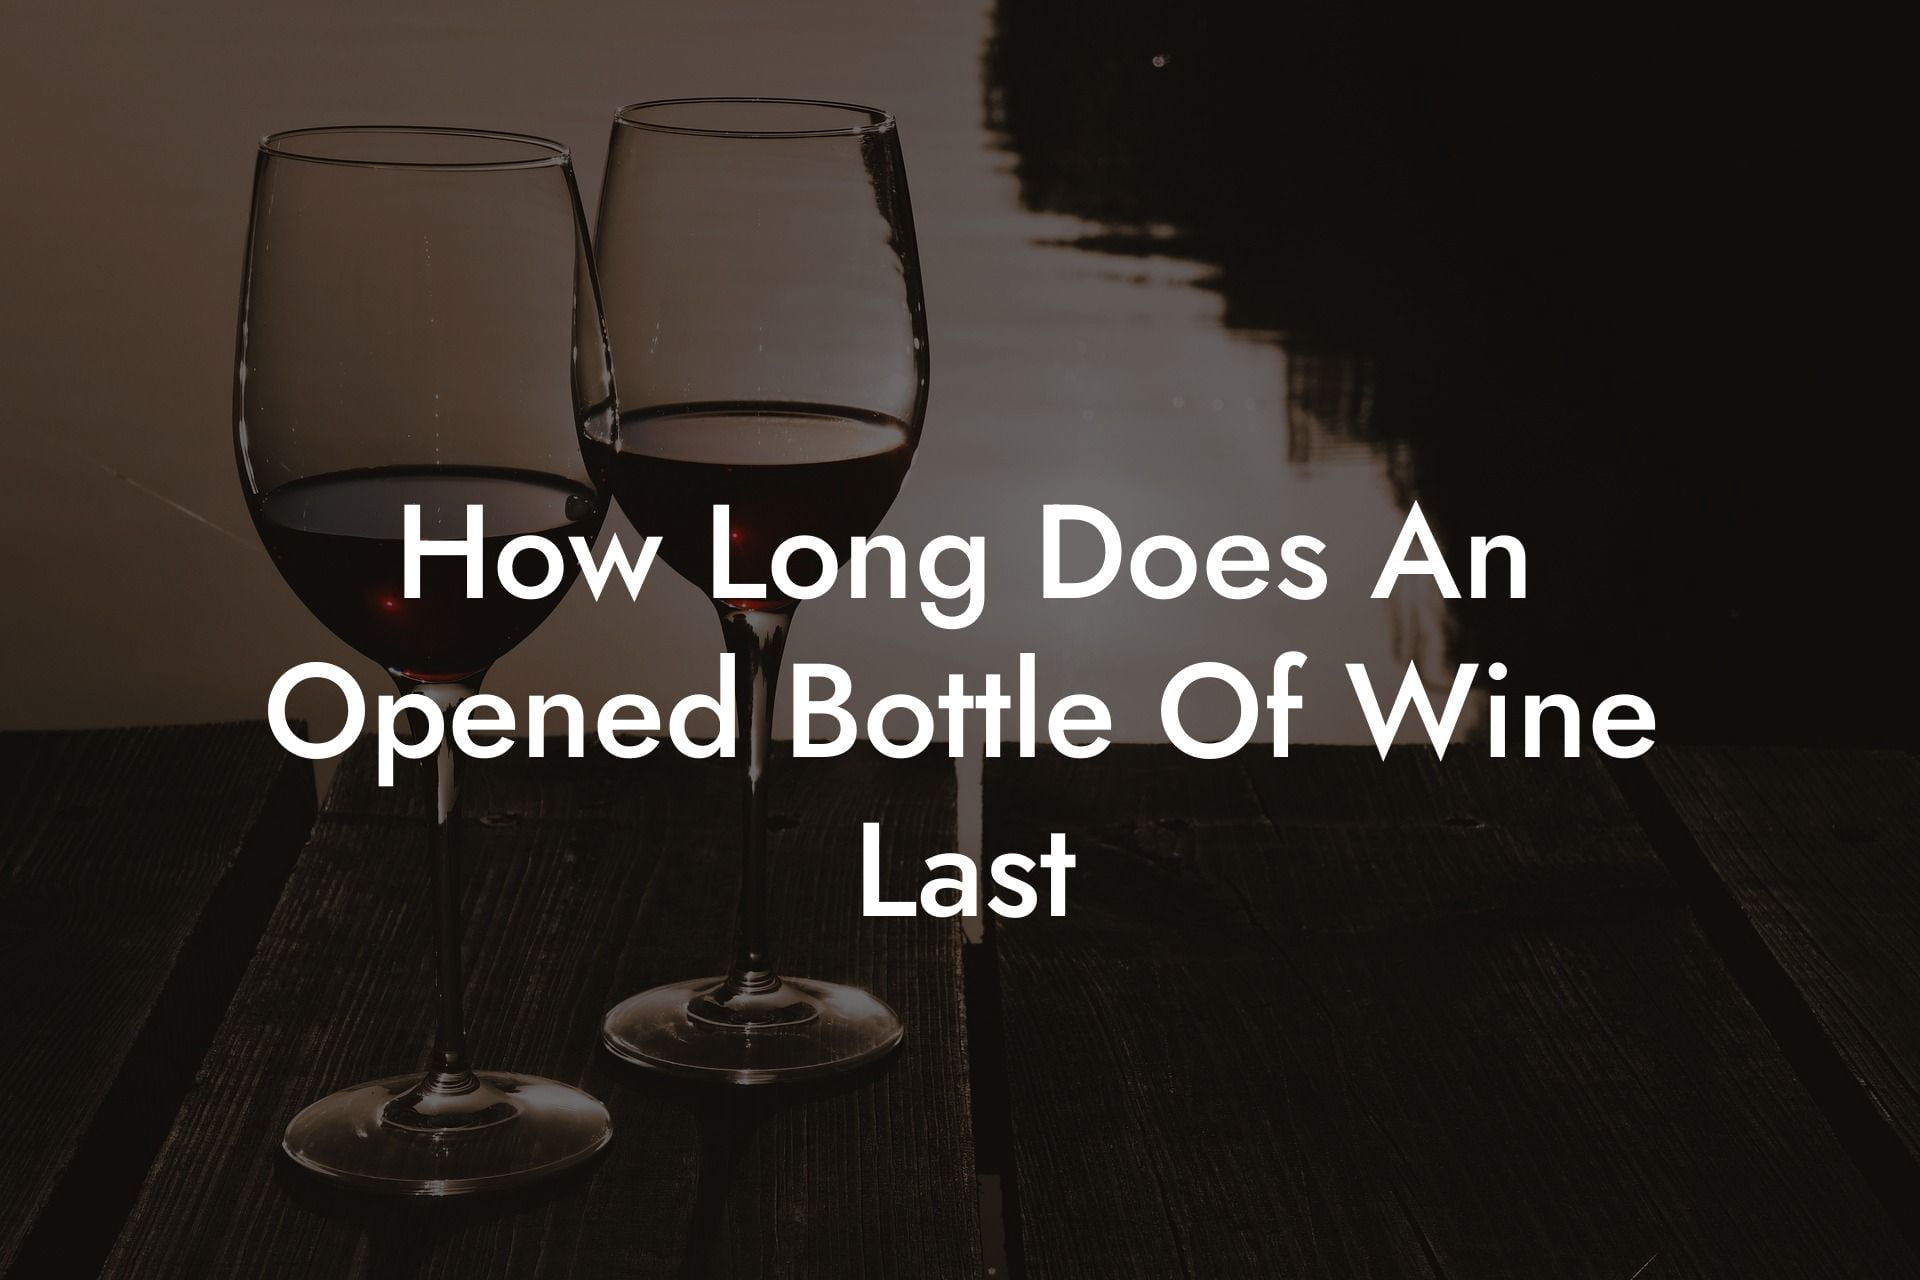 How Long Does An Opened Bottle Of Wine Last